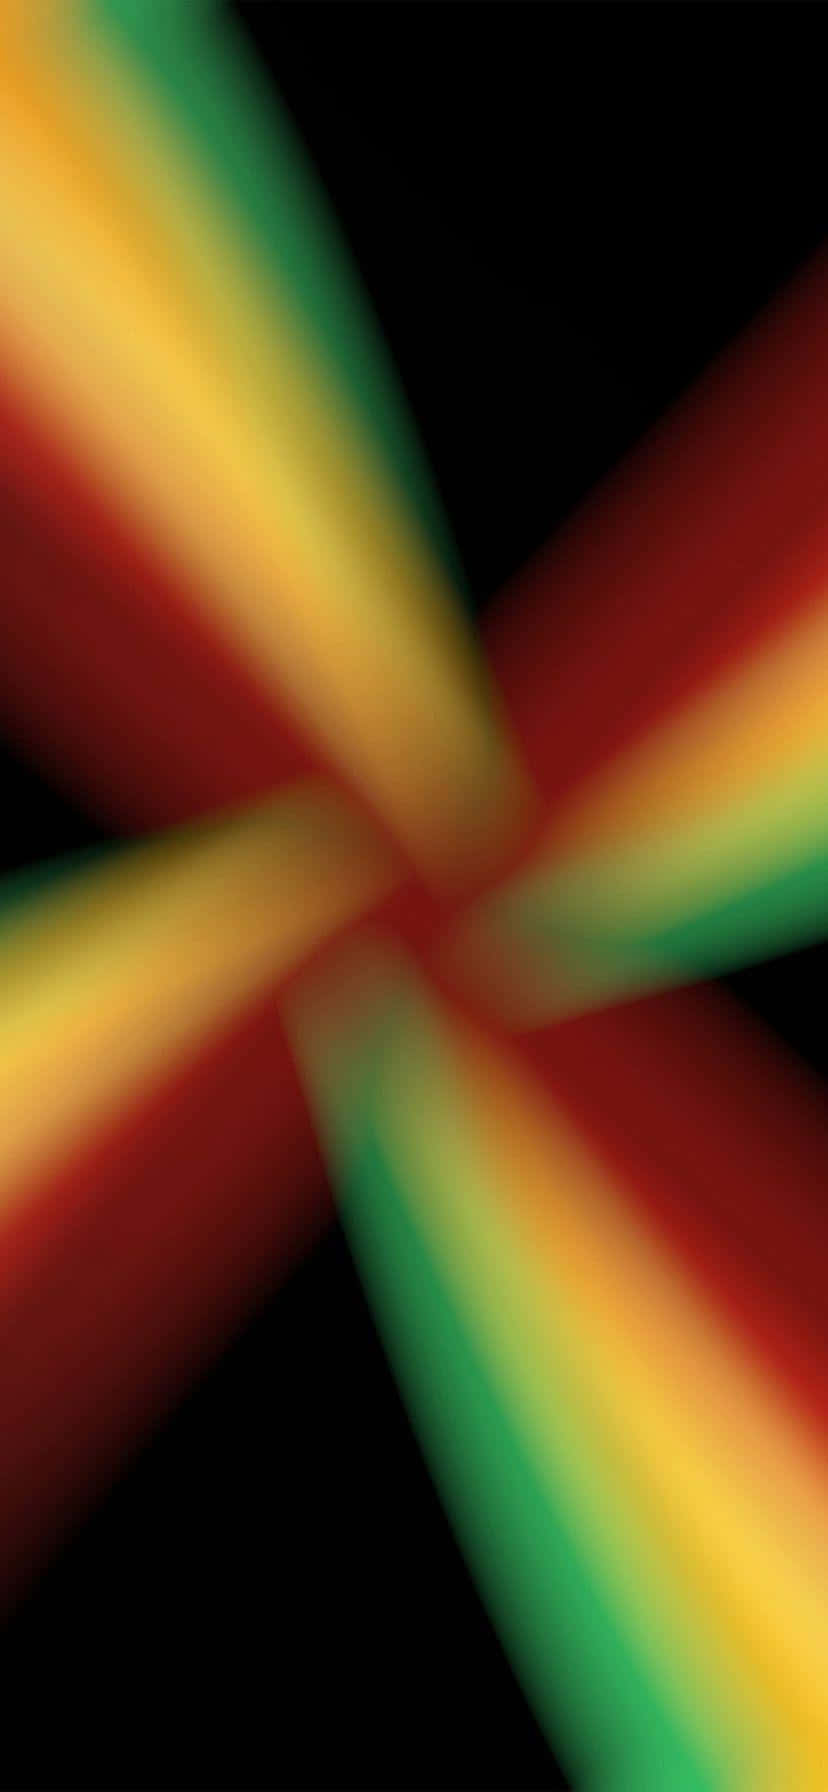 Faded Prism Of Red And Green Background